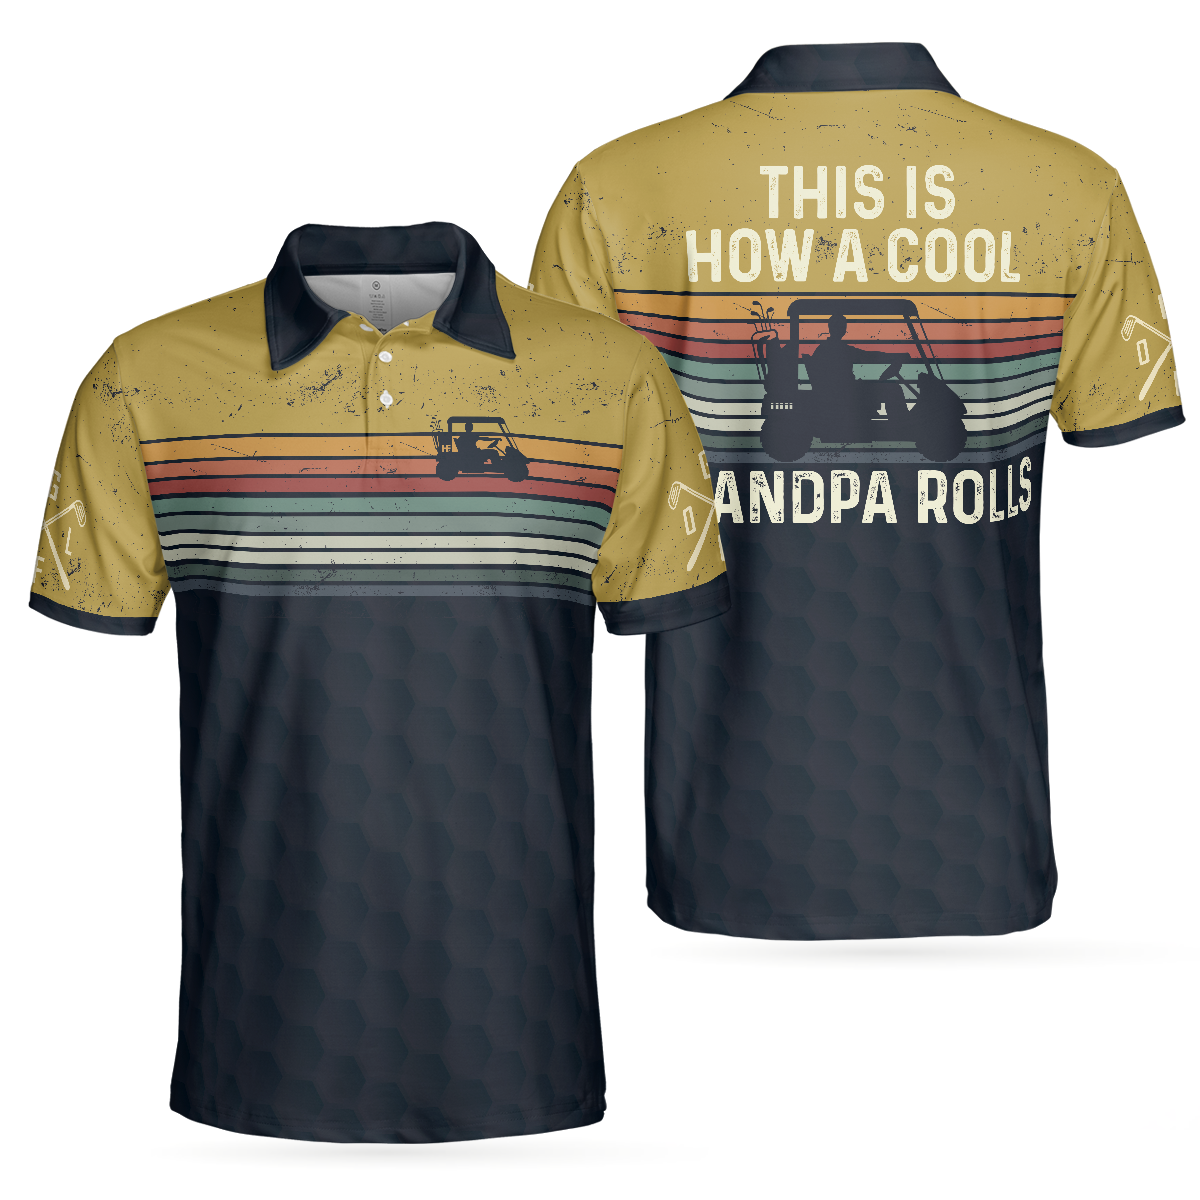 This Is How A Cool Grandpa Rolls Golf Polo Shirt Striped Shirt For Men Cool Golf Gift For Golfers - 1